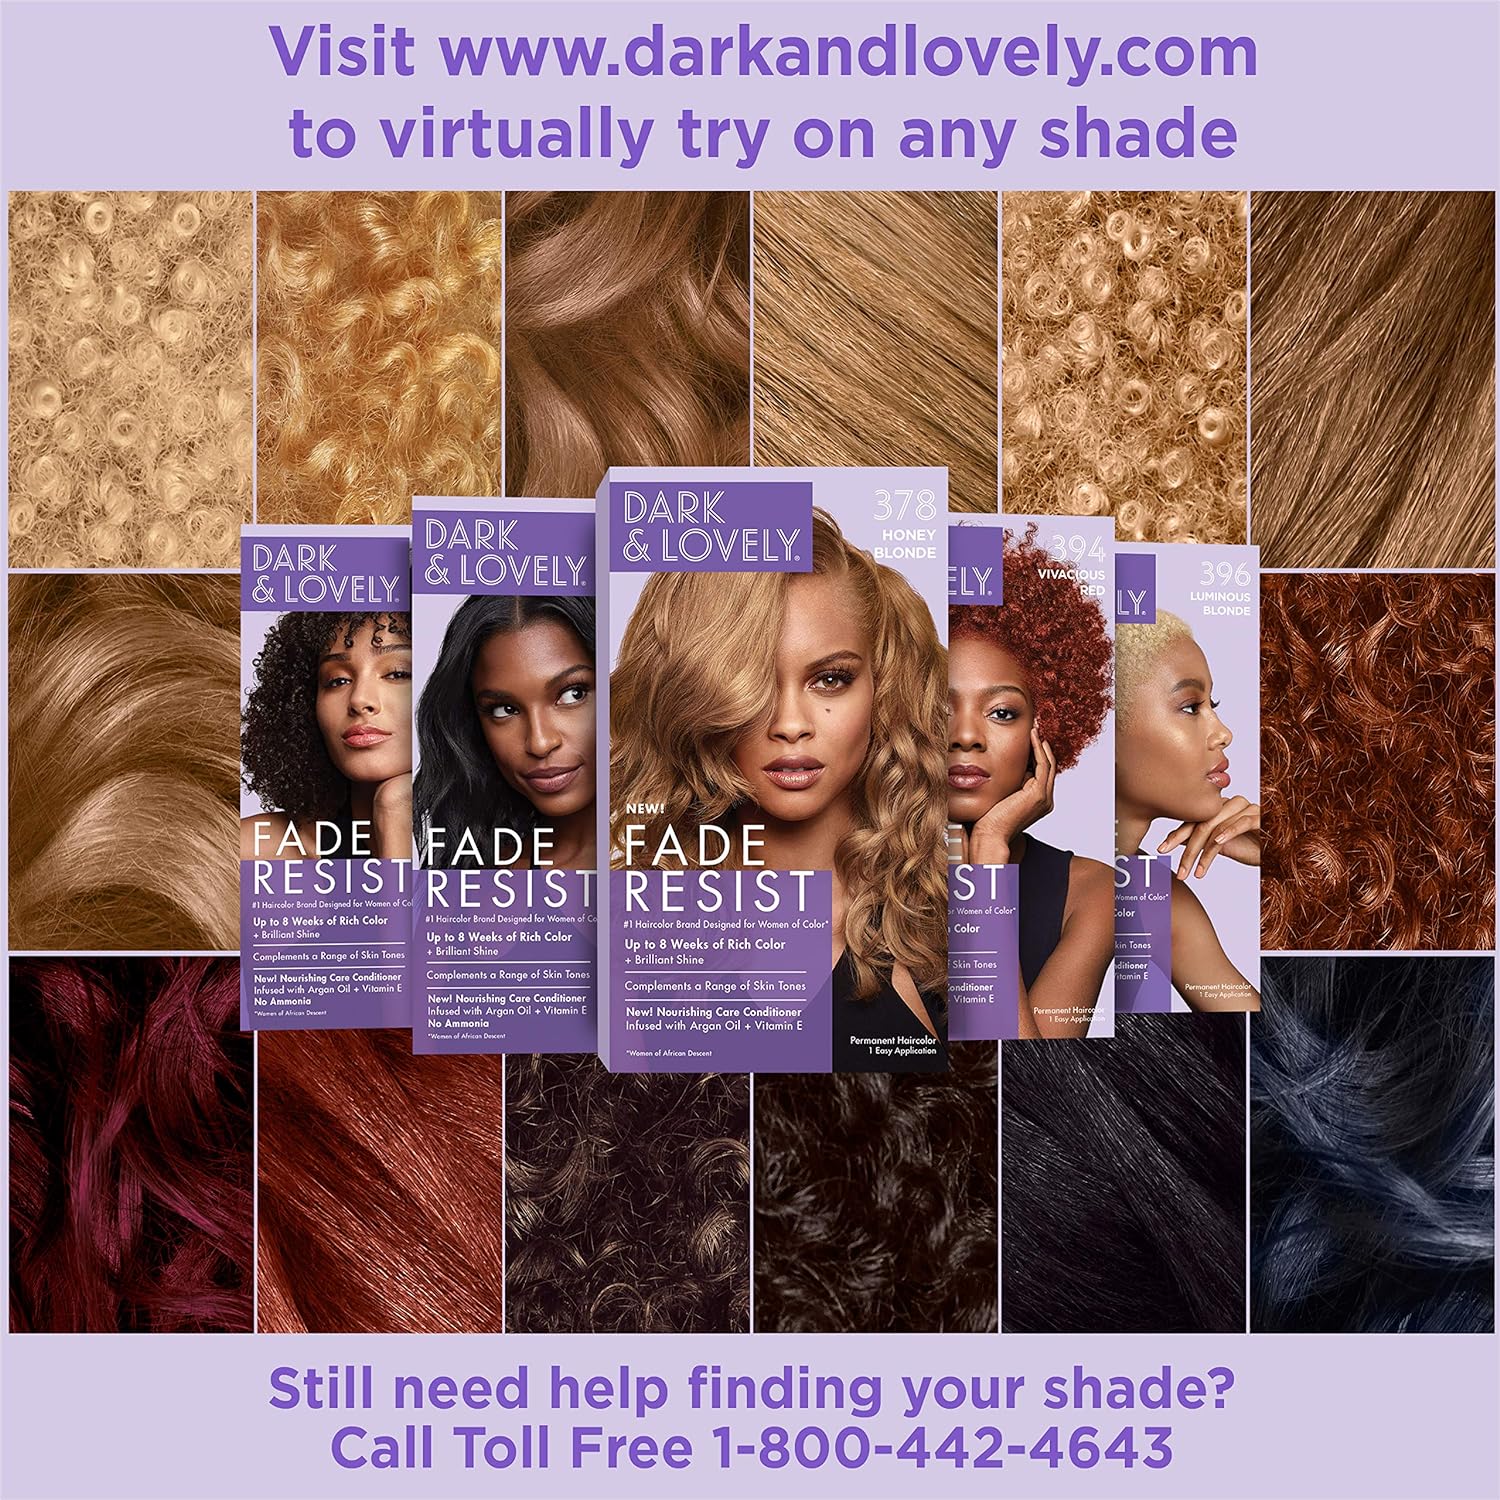 SoftSheen-Carson Dark and Lovely Fade Resist Rich Conditioning Hair Color, Permanent Hair Color, Up To 100 percent Gray Coverage, Brilliant Shine with Argan Oil and Vitamin E, Jet Black : Chemical Hair Dyes : Beauty & Personal Care